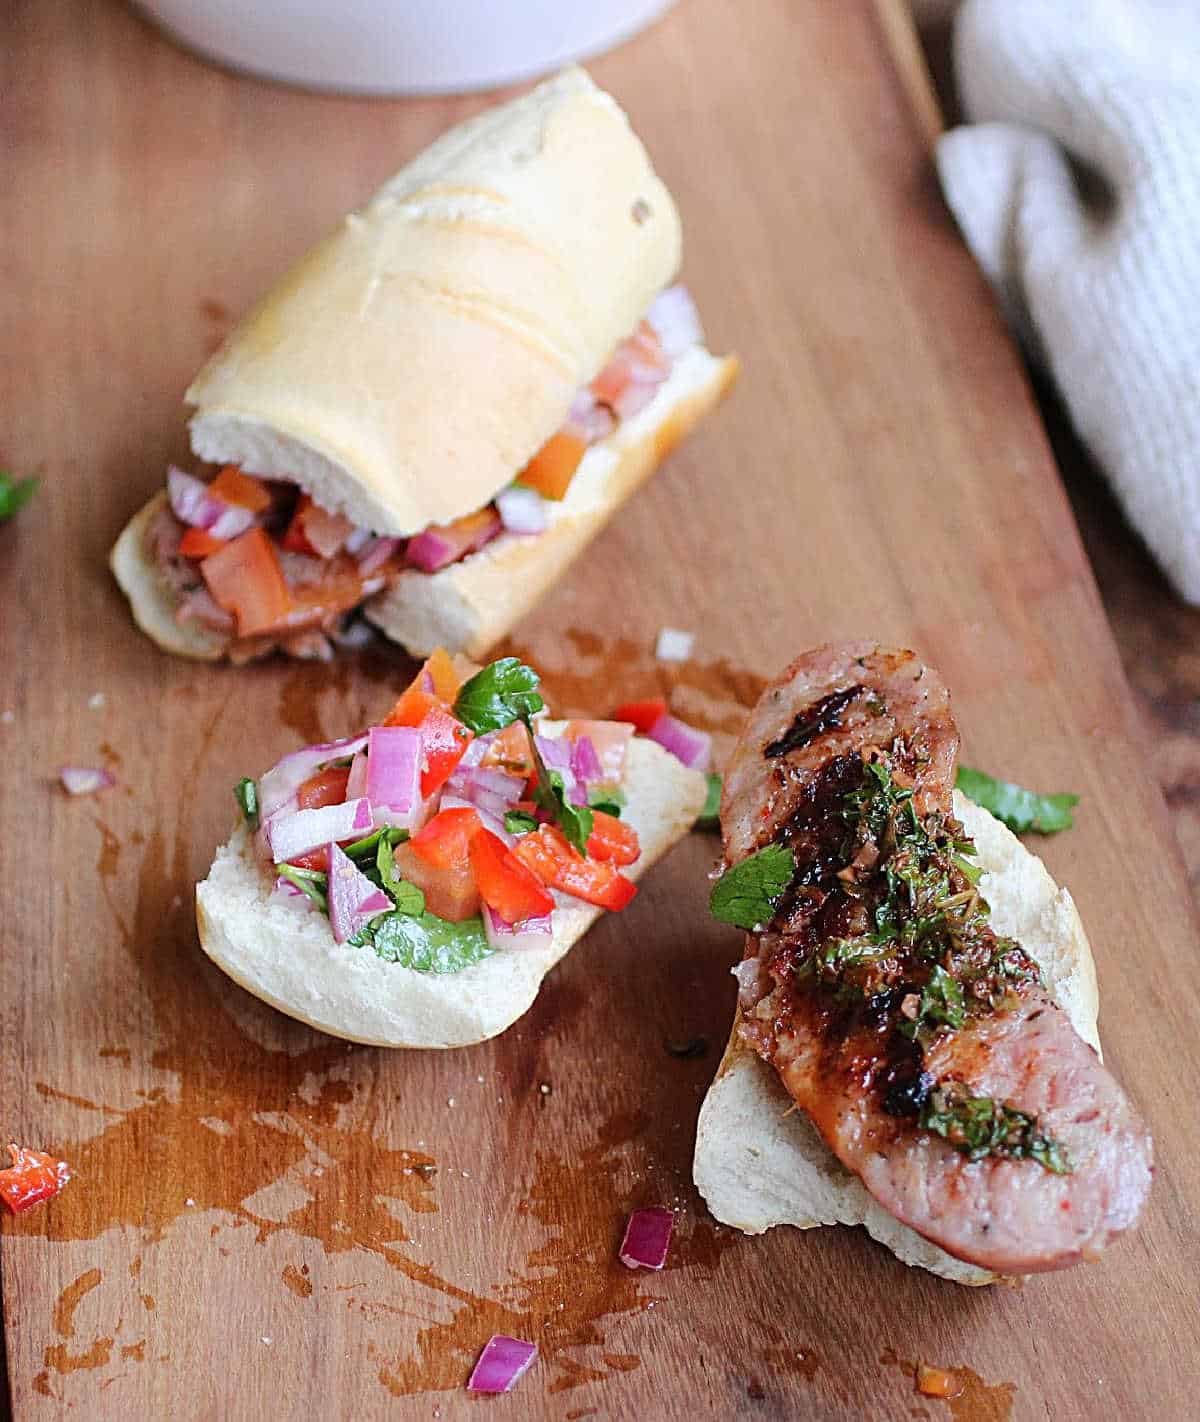 One whole and one open faced choripan sandwiches on a wooden board.